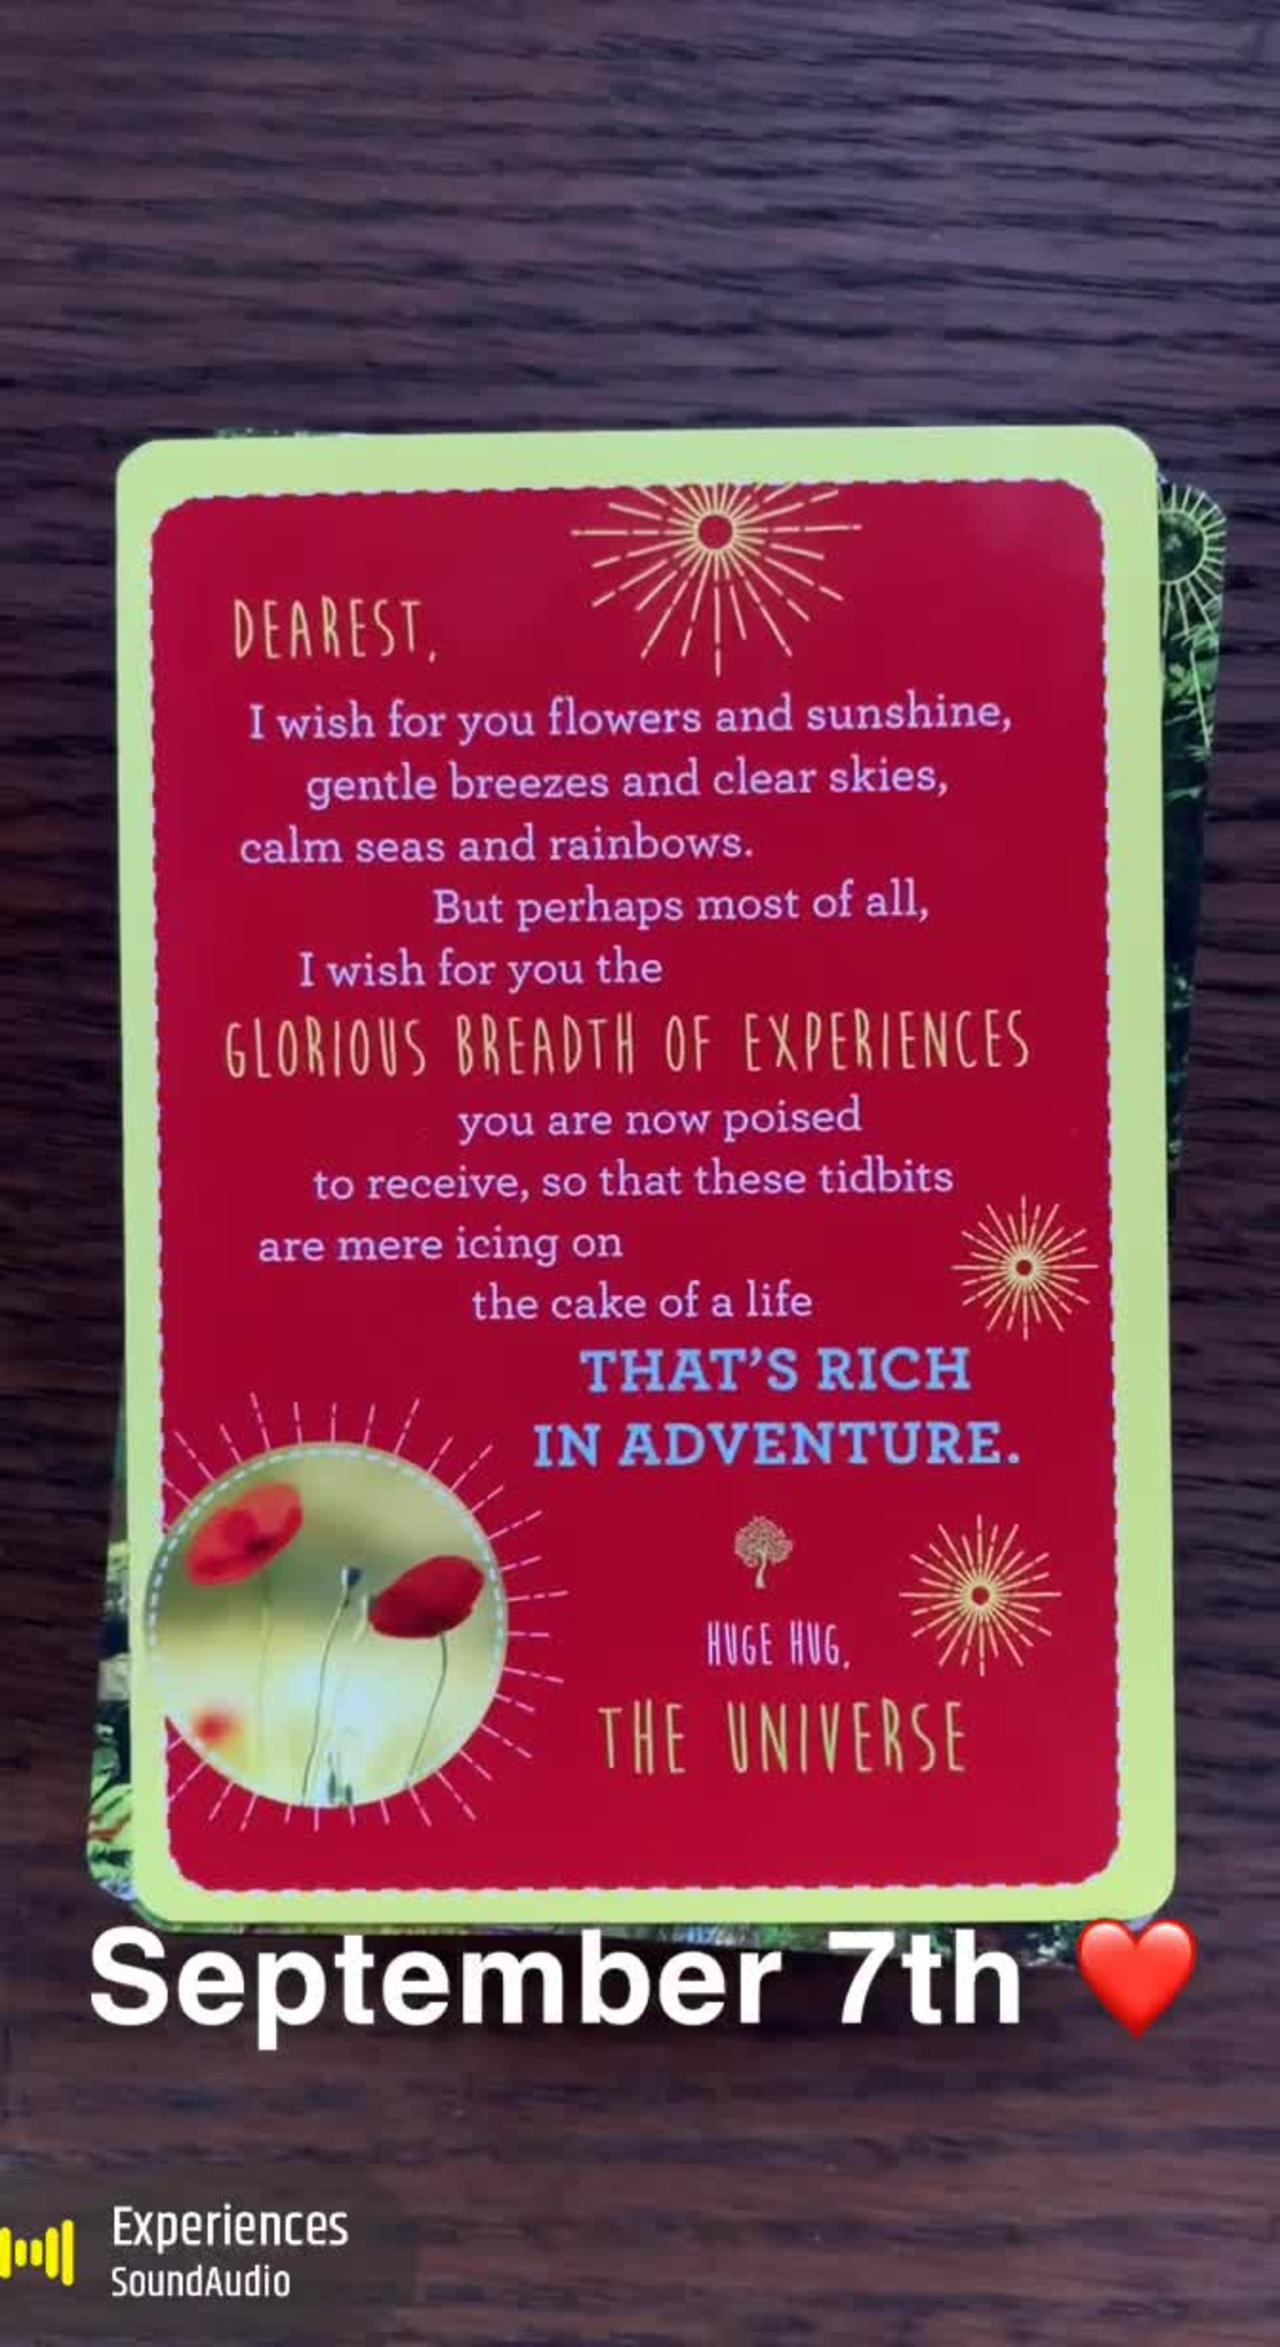 September 7th oracle card: experiences